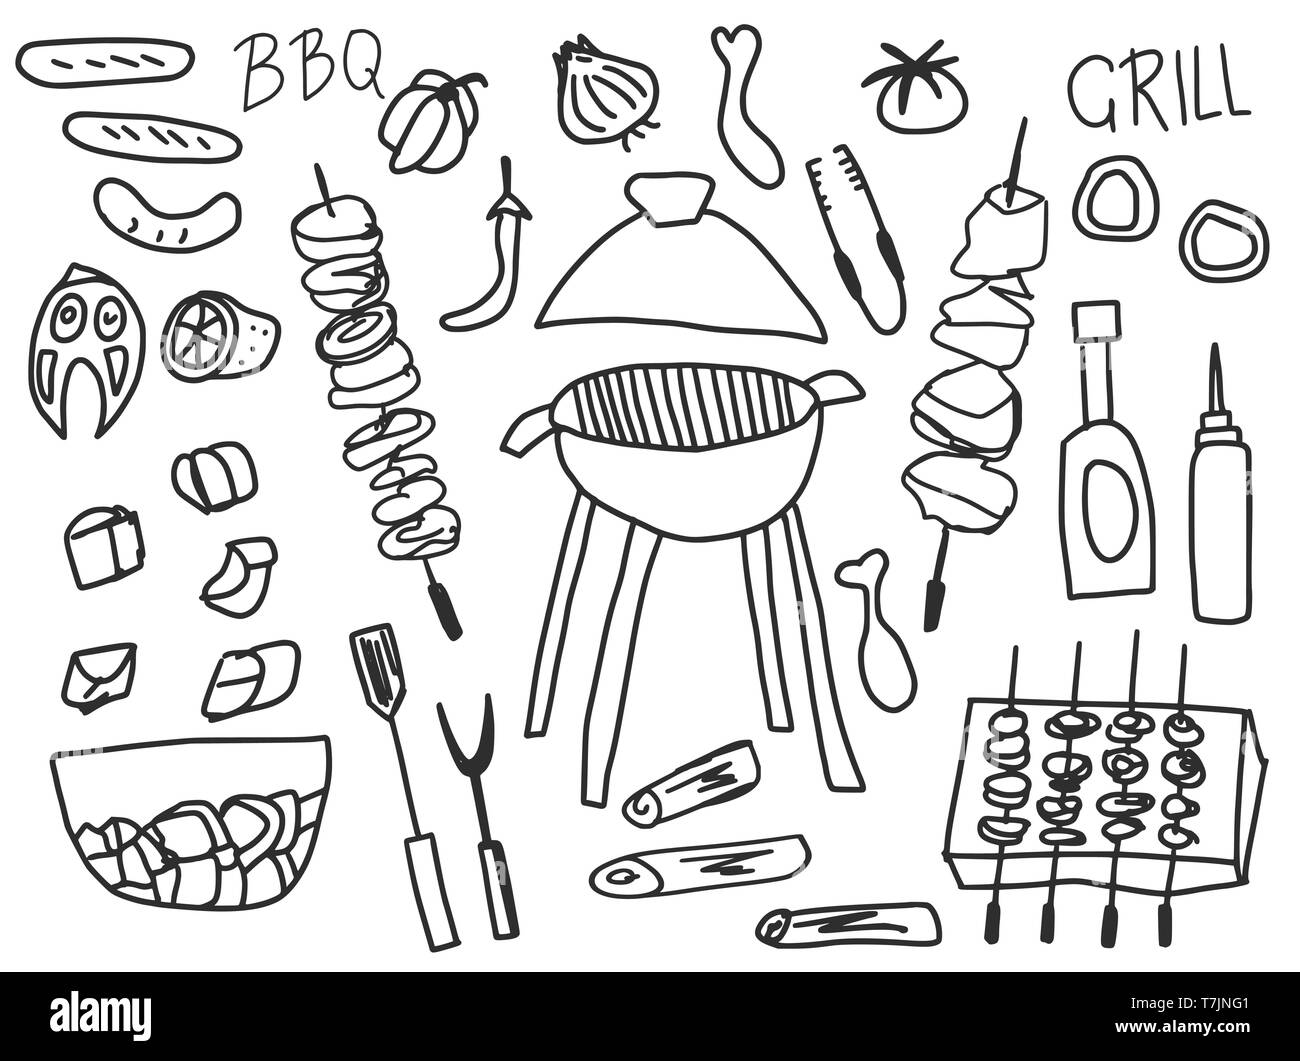 Barbecue Coloring Coloring Pages